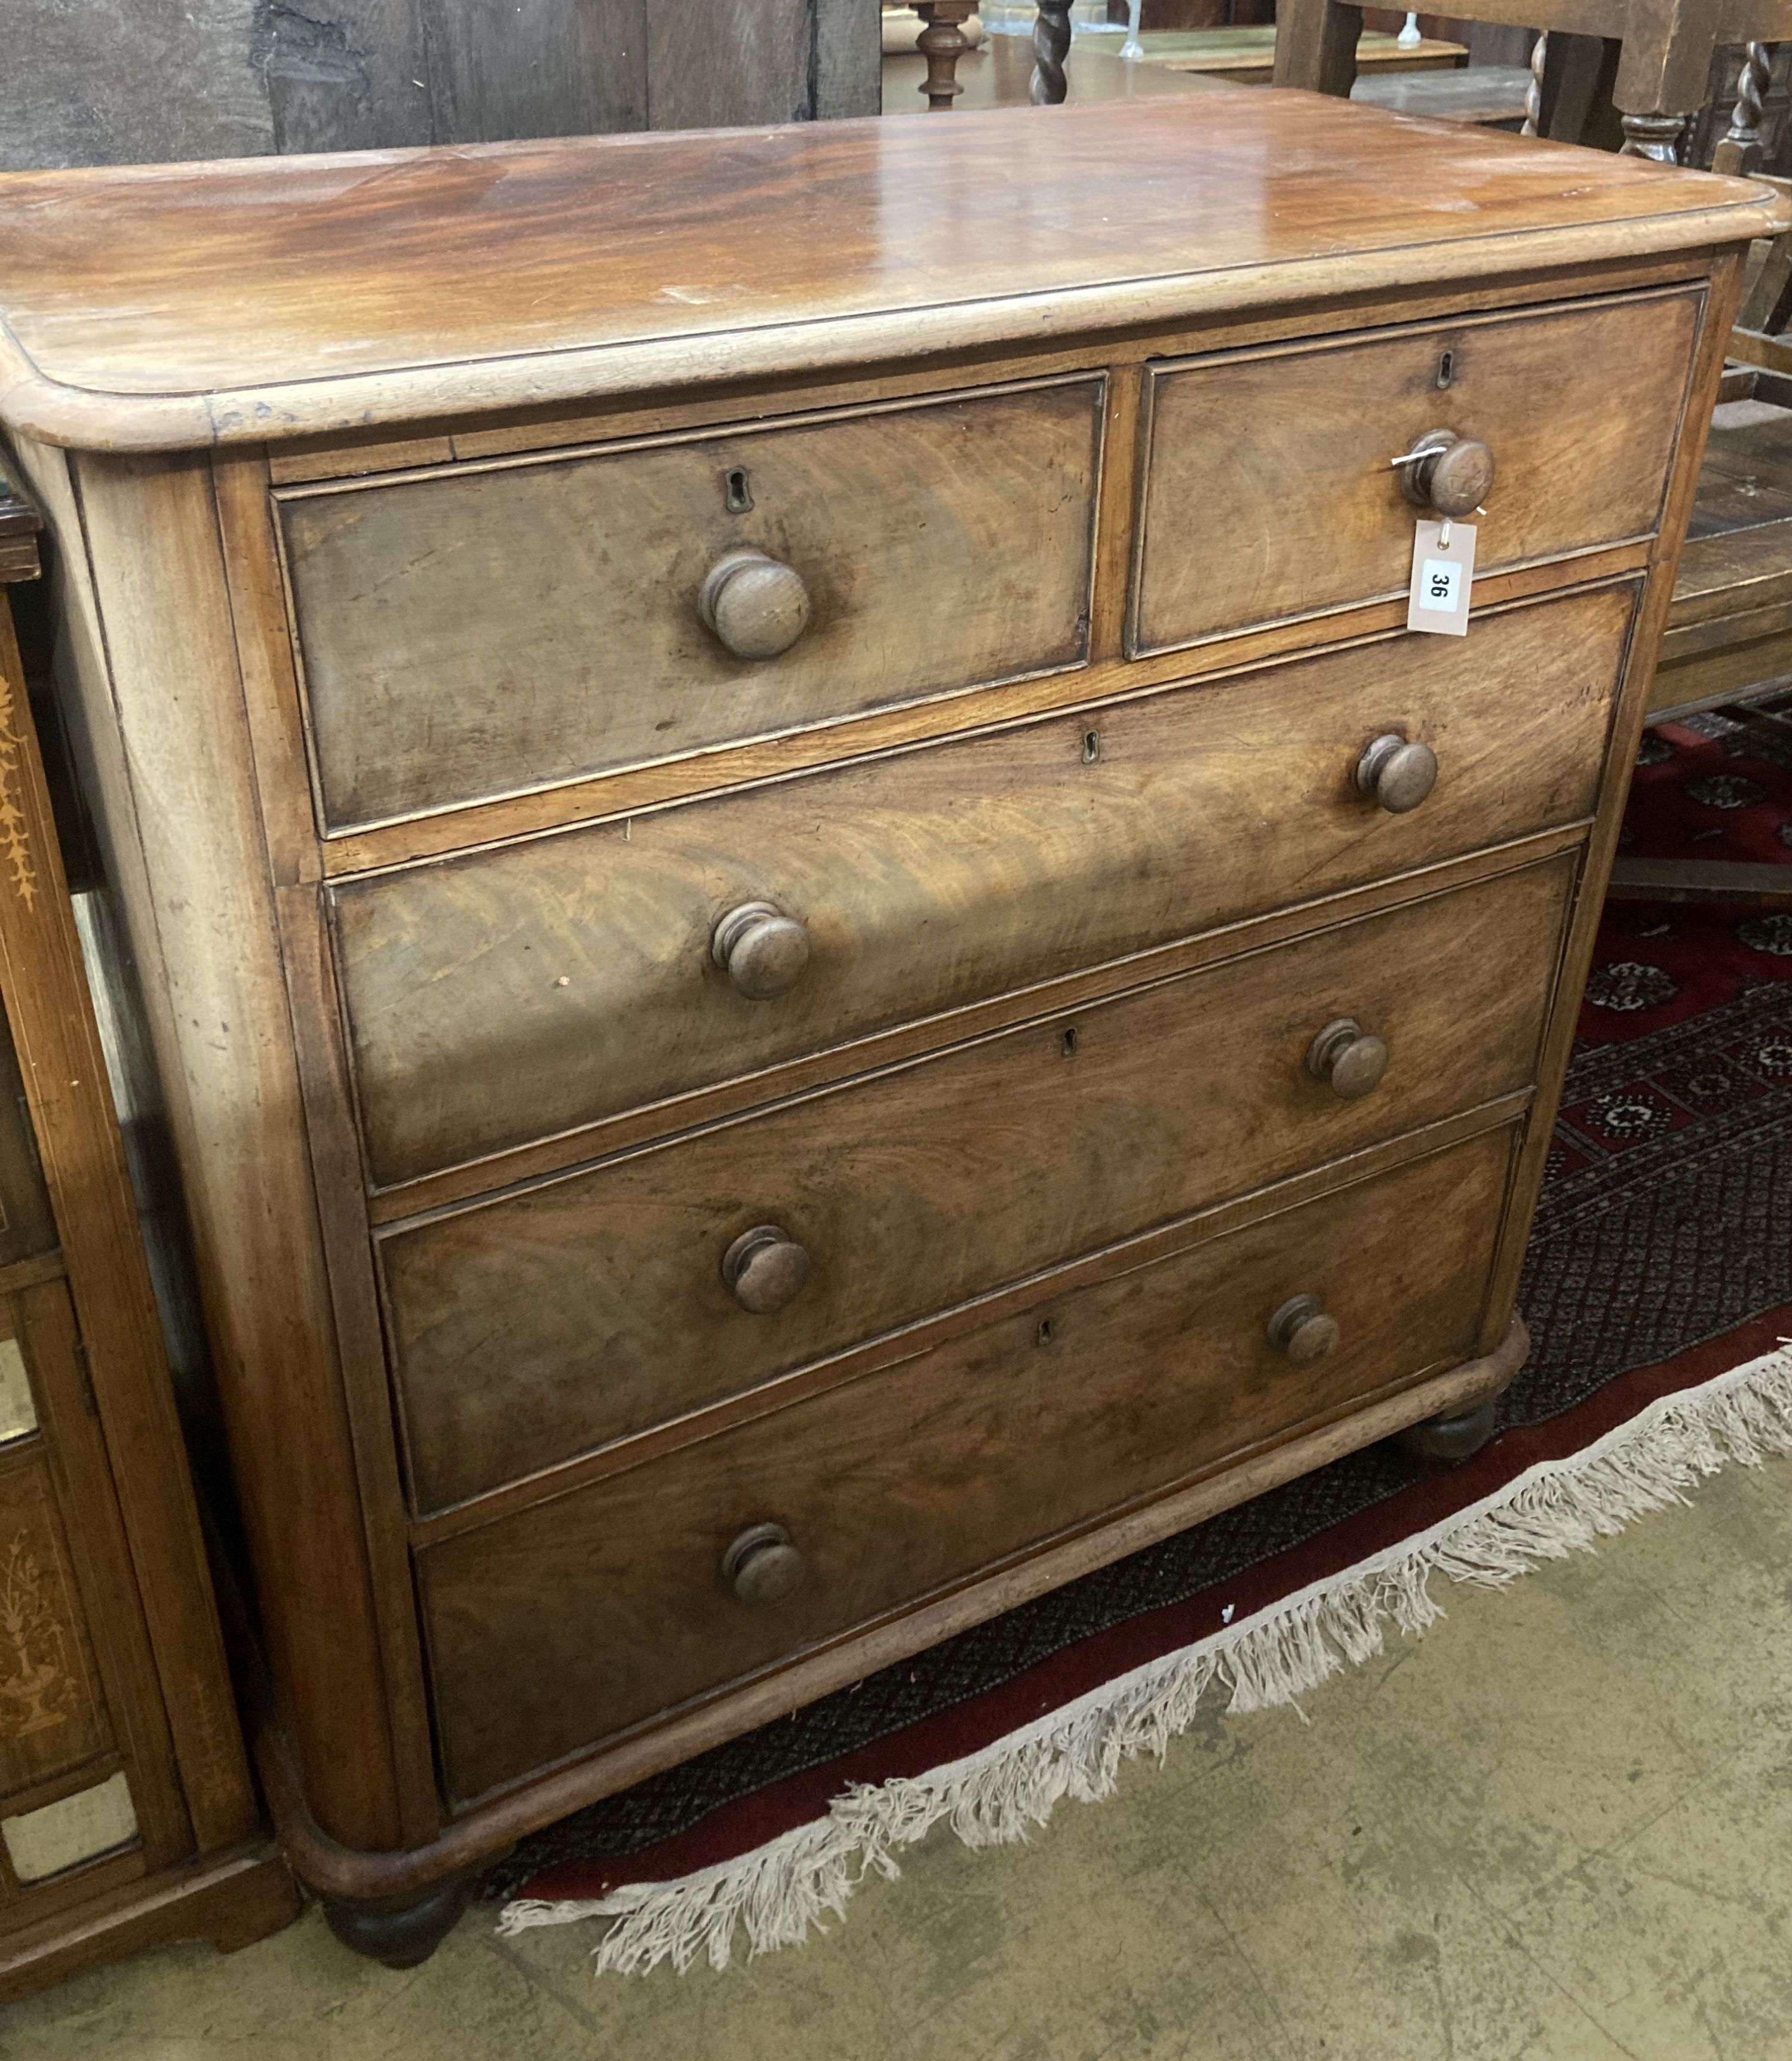 A Victorian mahogany chest of drawers, width 106cm, depth 52cm, height 110cm